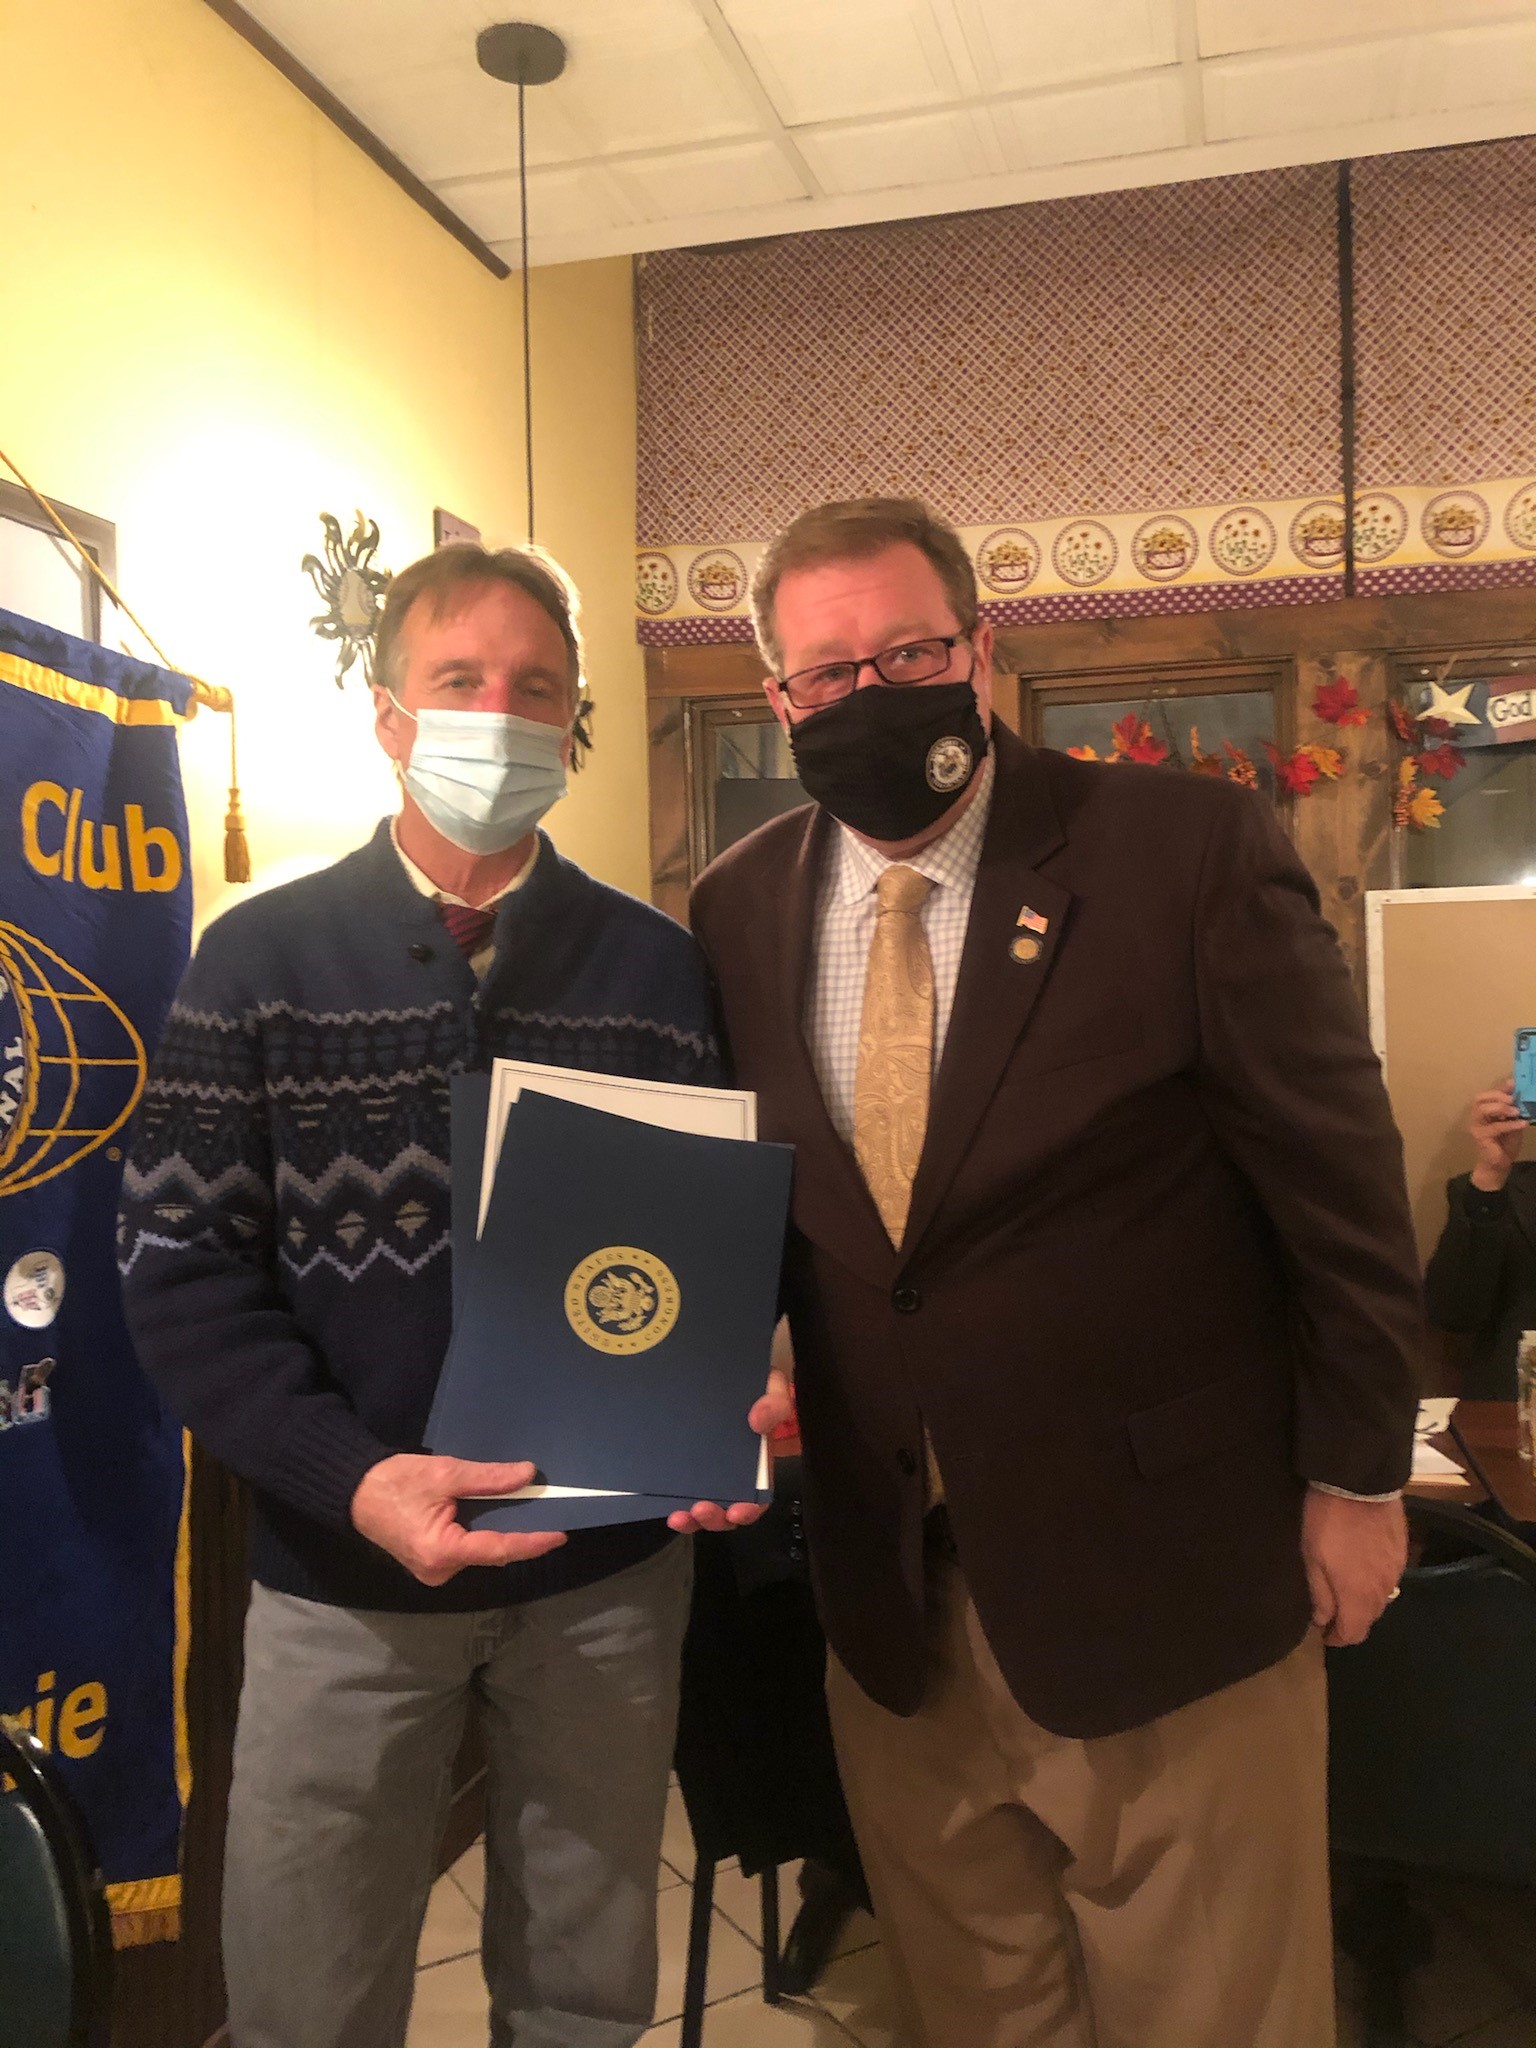 Assemblyman Chris Tague (R,C,I,Ref-Schoharie) presents Kiwanis Vice President Michael Langan with an Assembly Citation as well as recognitions from the New York State Senate and United States House of